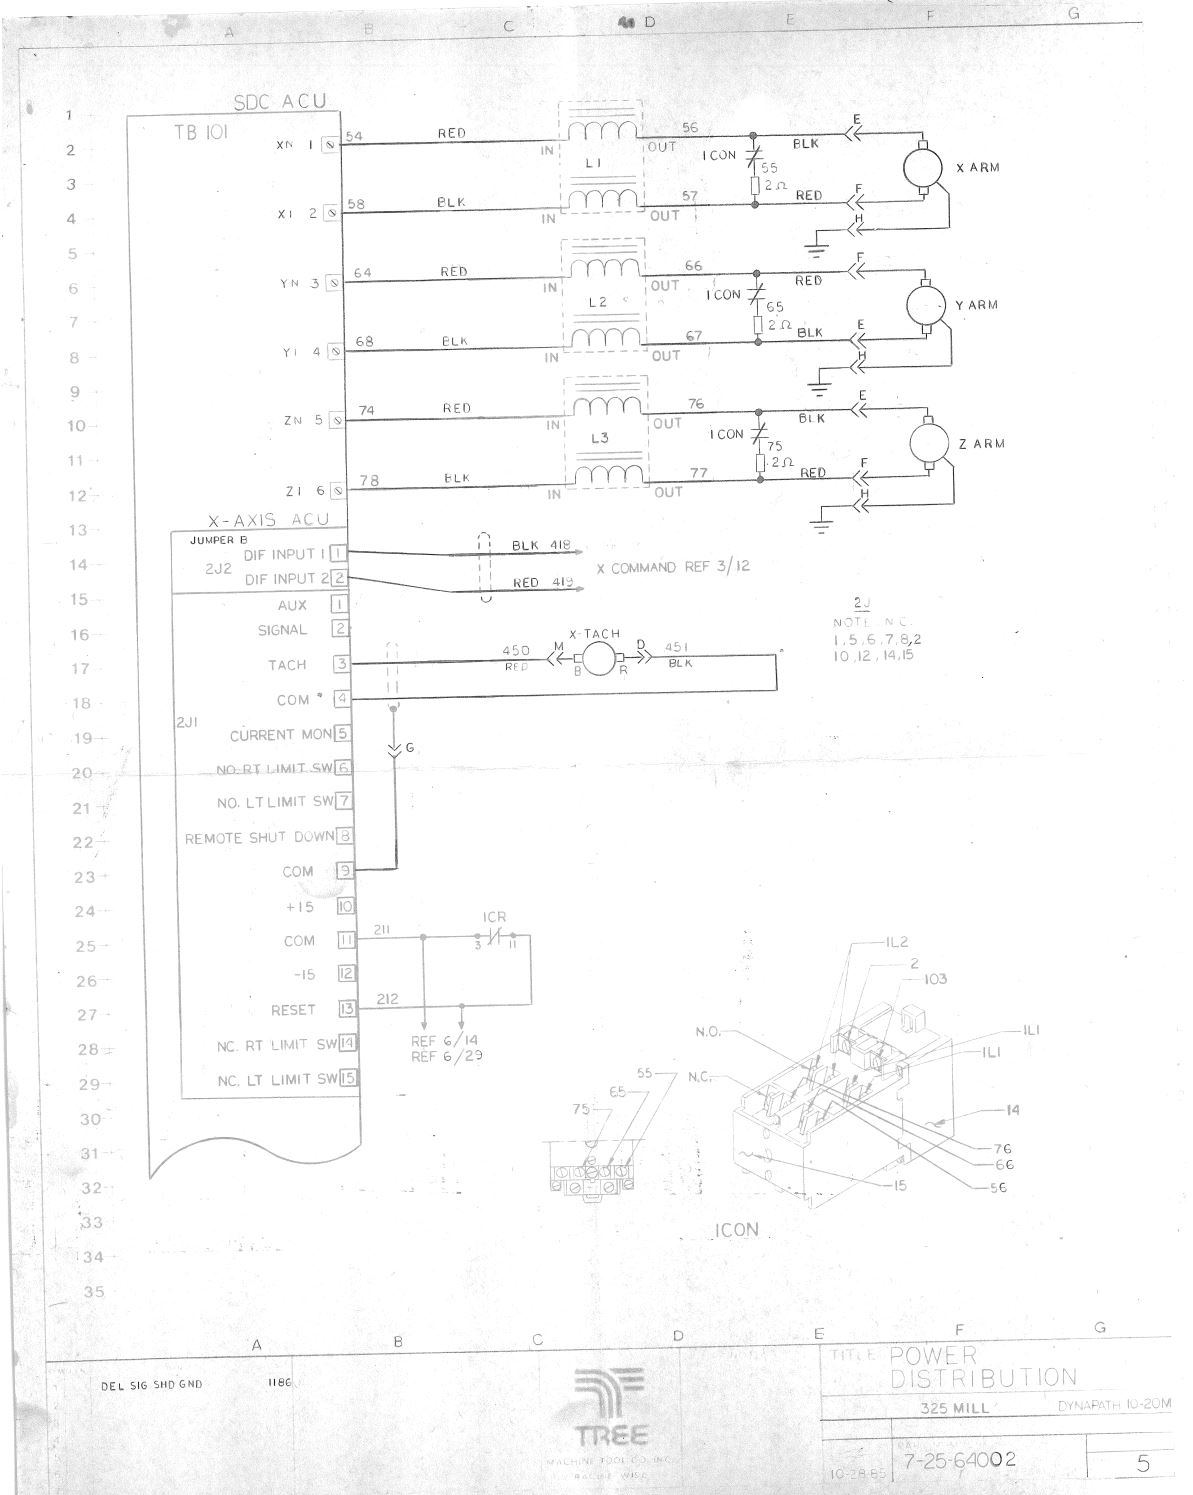 Tree 325 Schematic Page 5